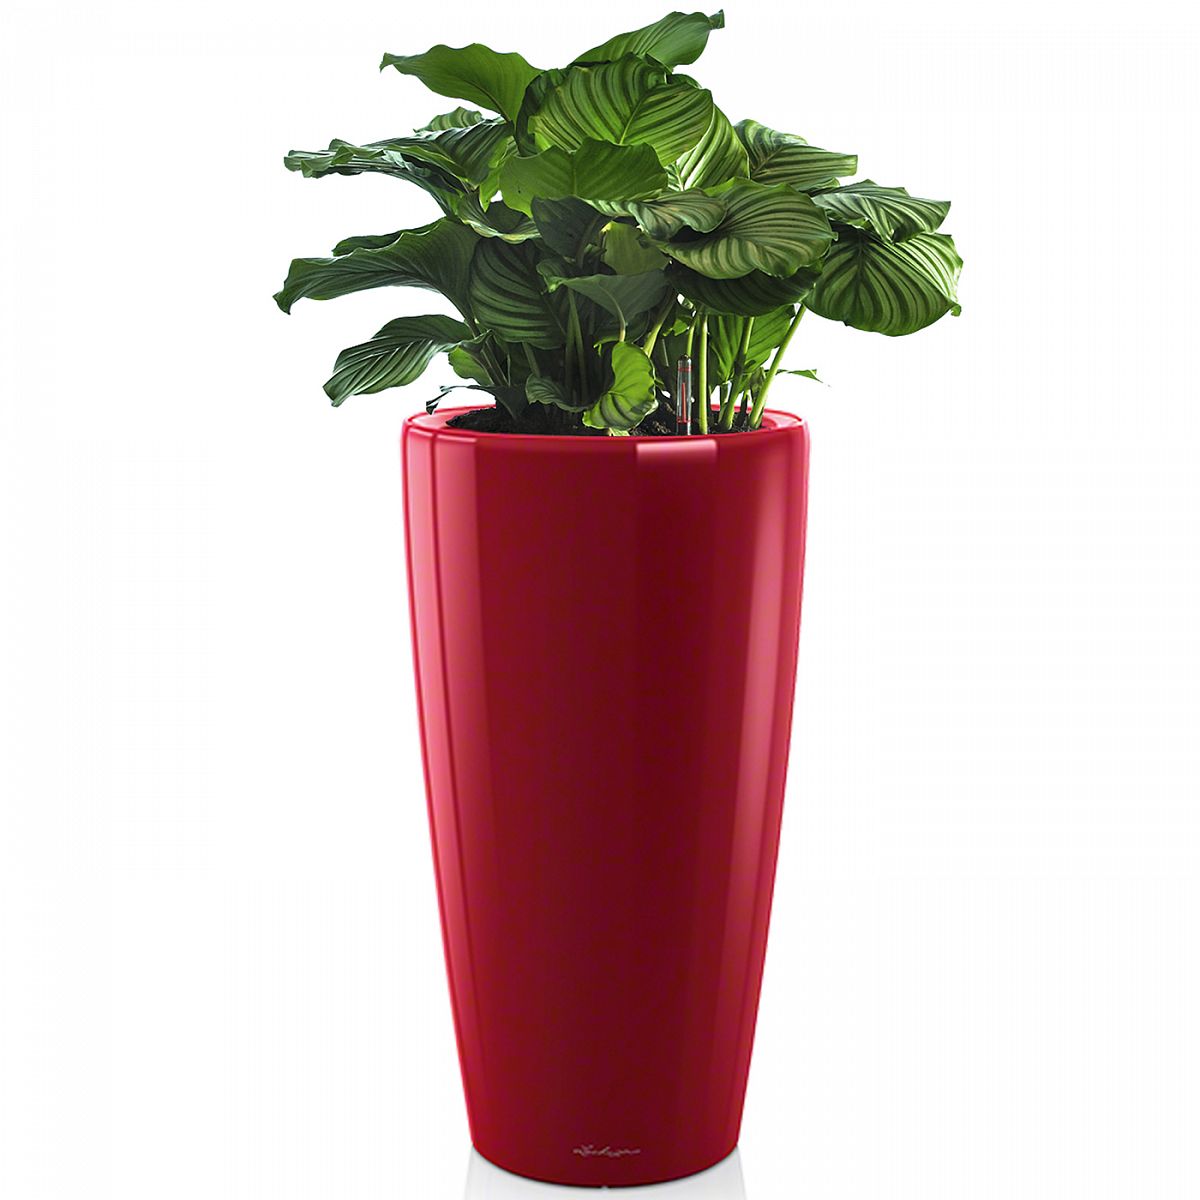 LECHUZA Rondo Round Tall Poly Resin Self-watering Planter